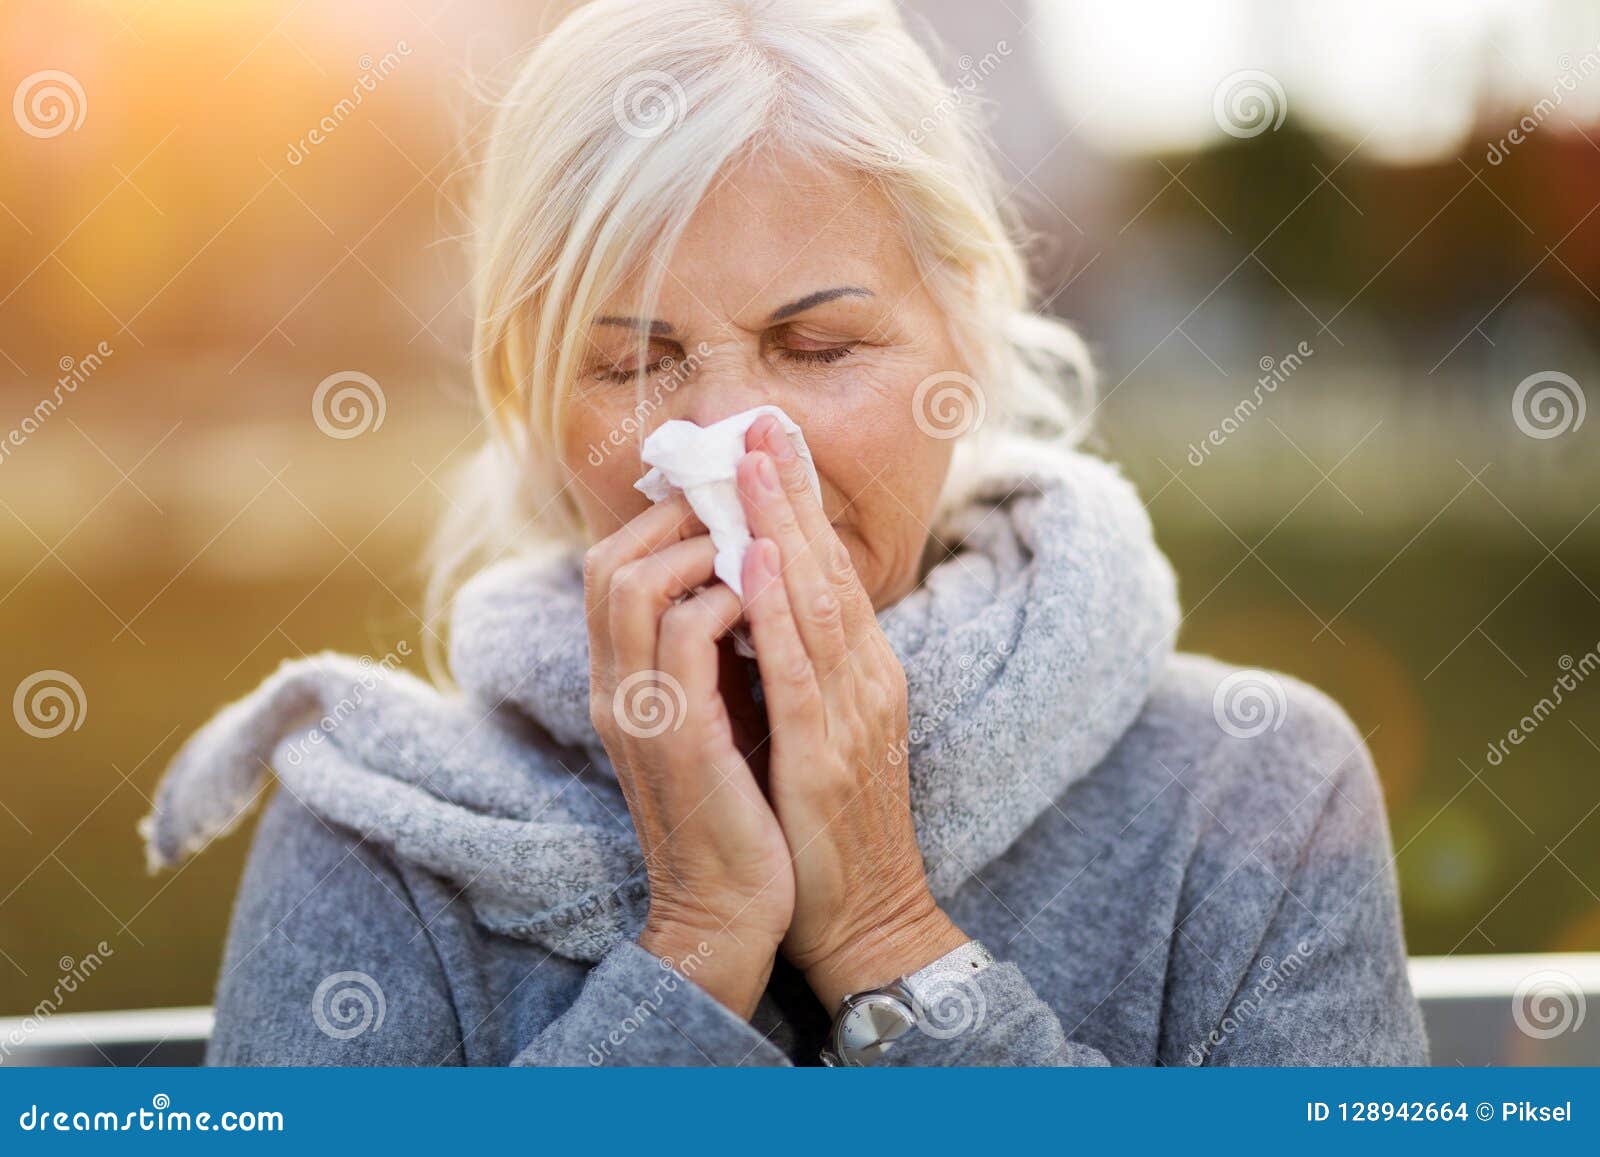 senior woman blowing her nose